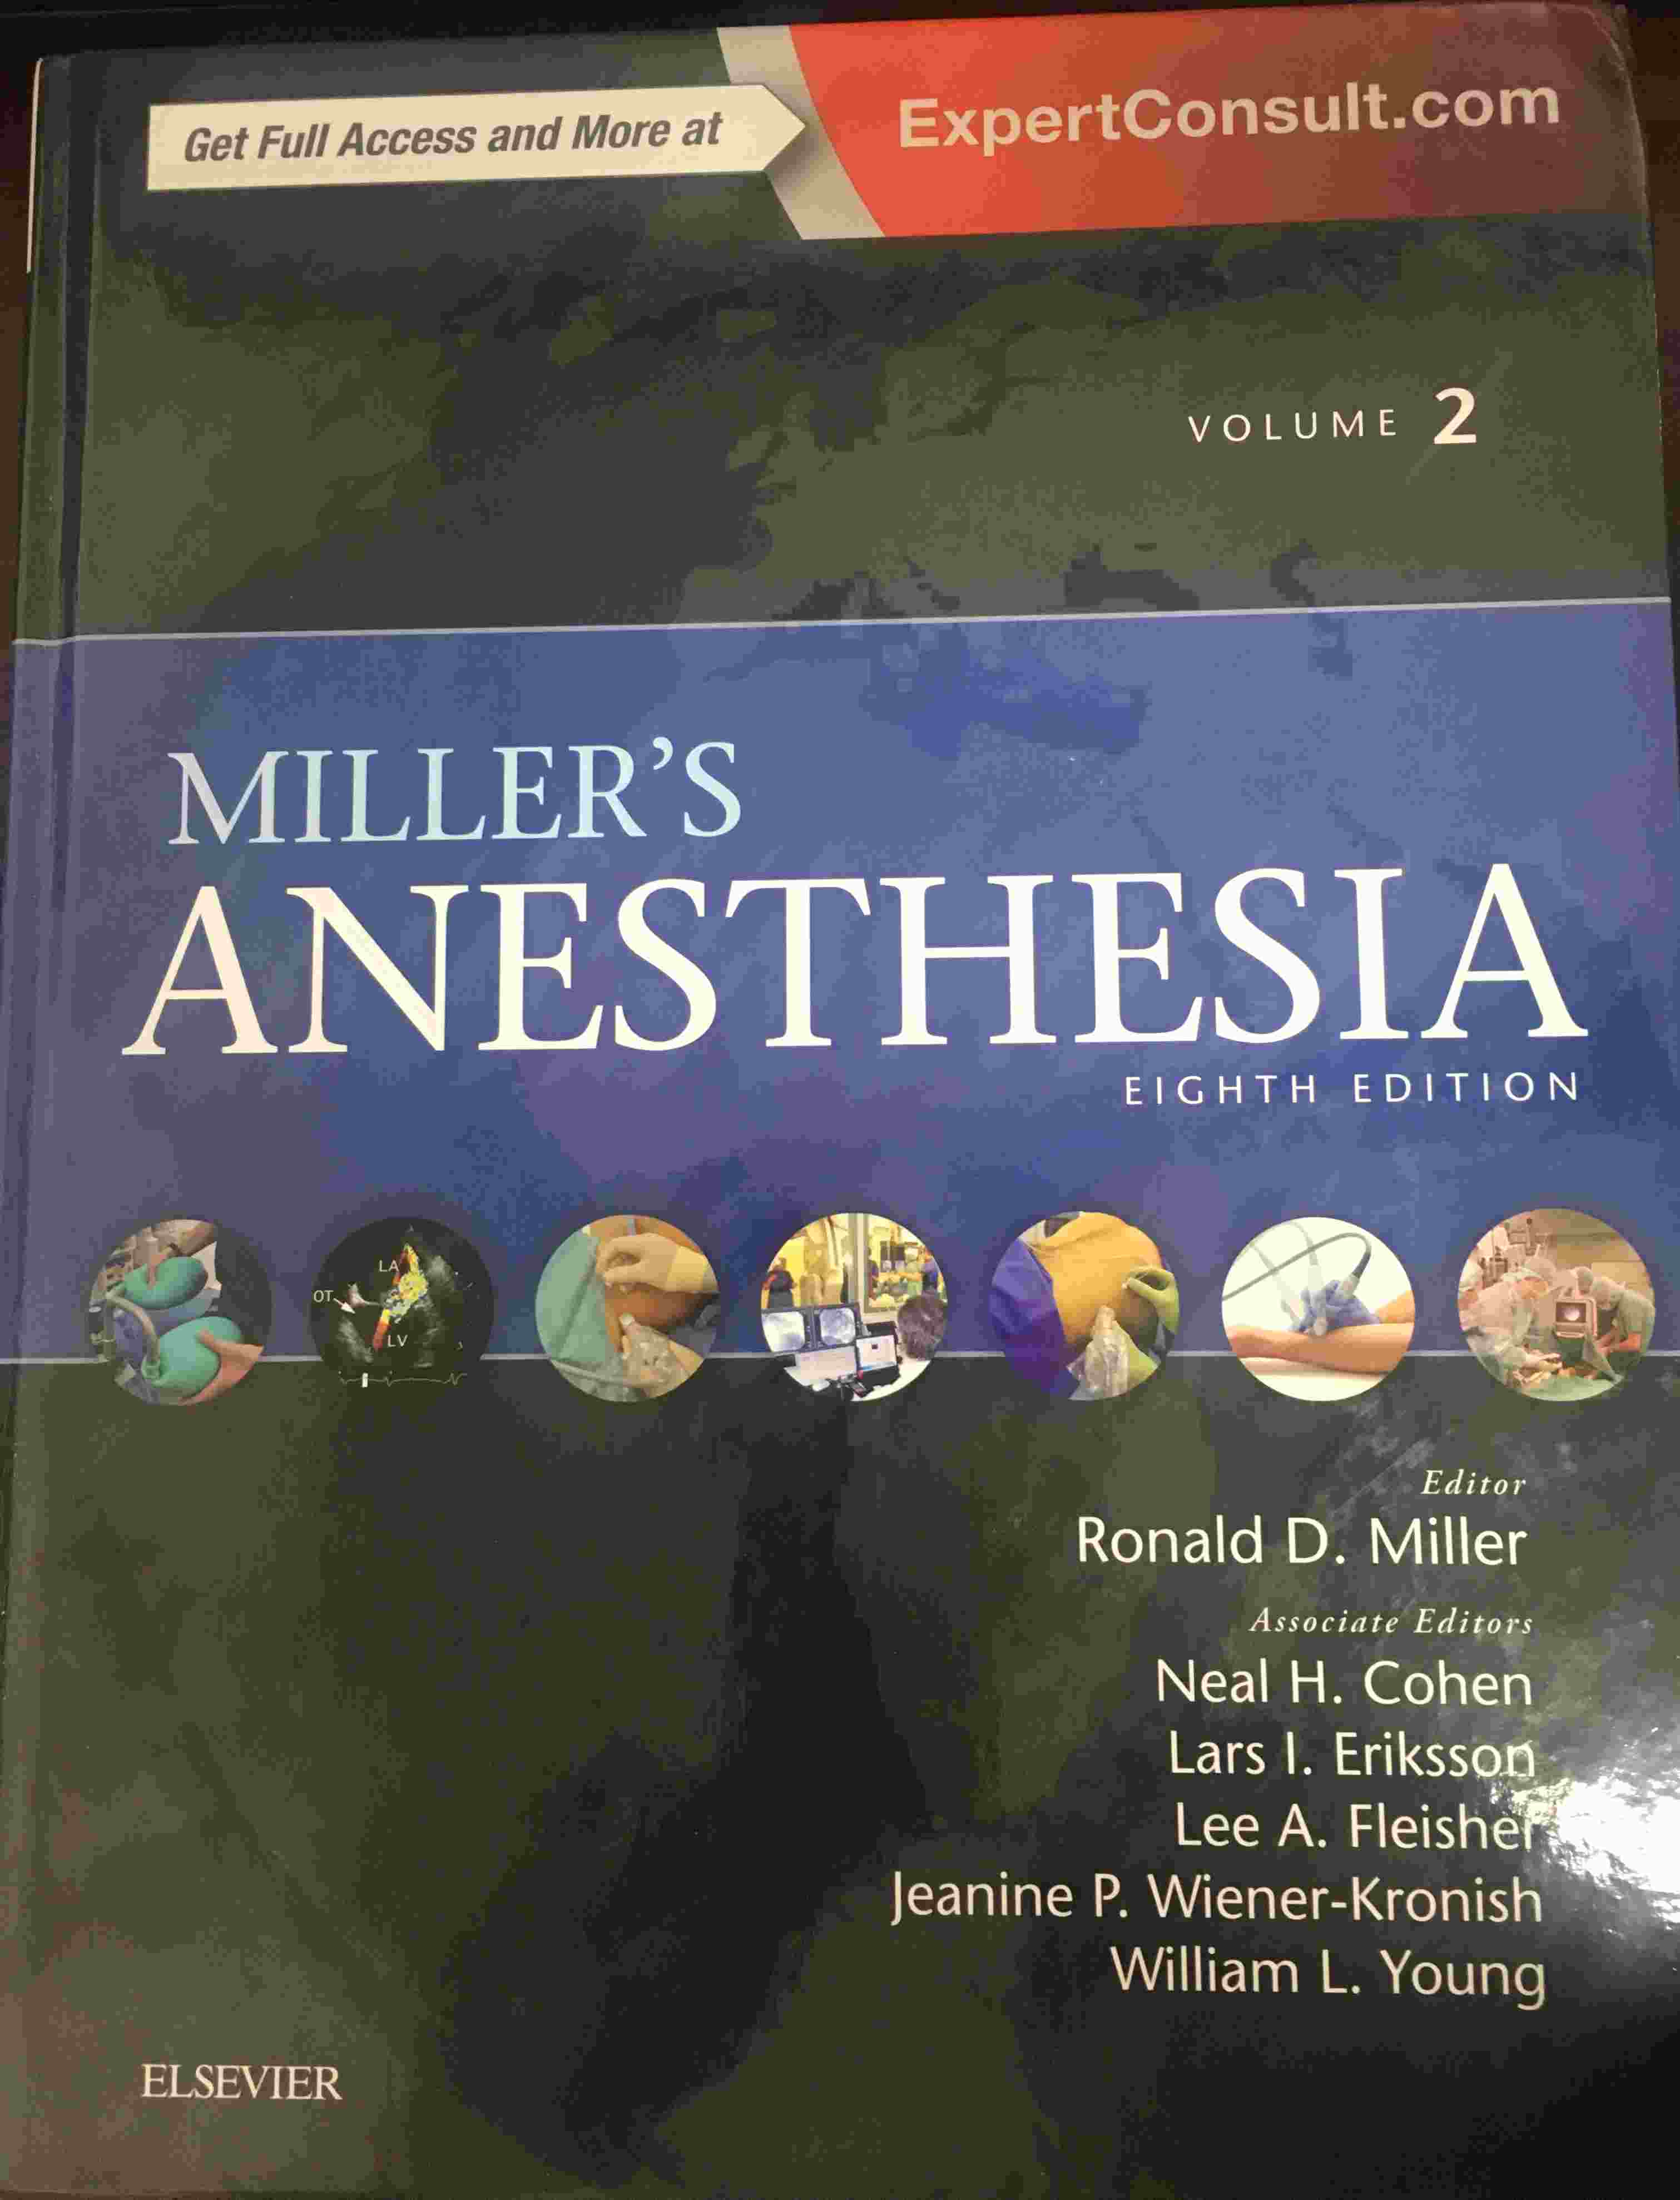 «Miller's Anesthesia »